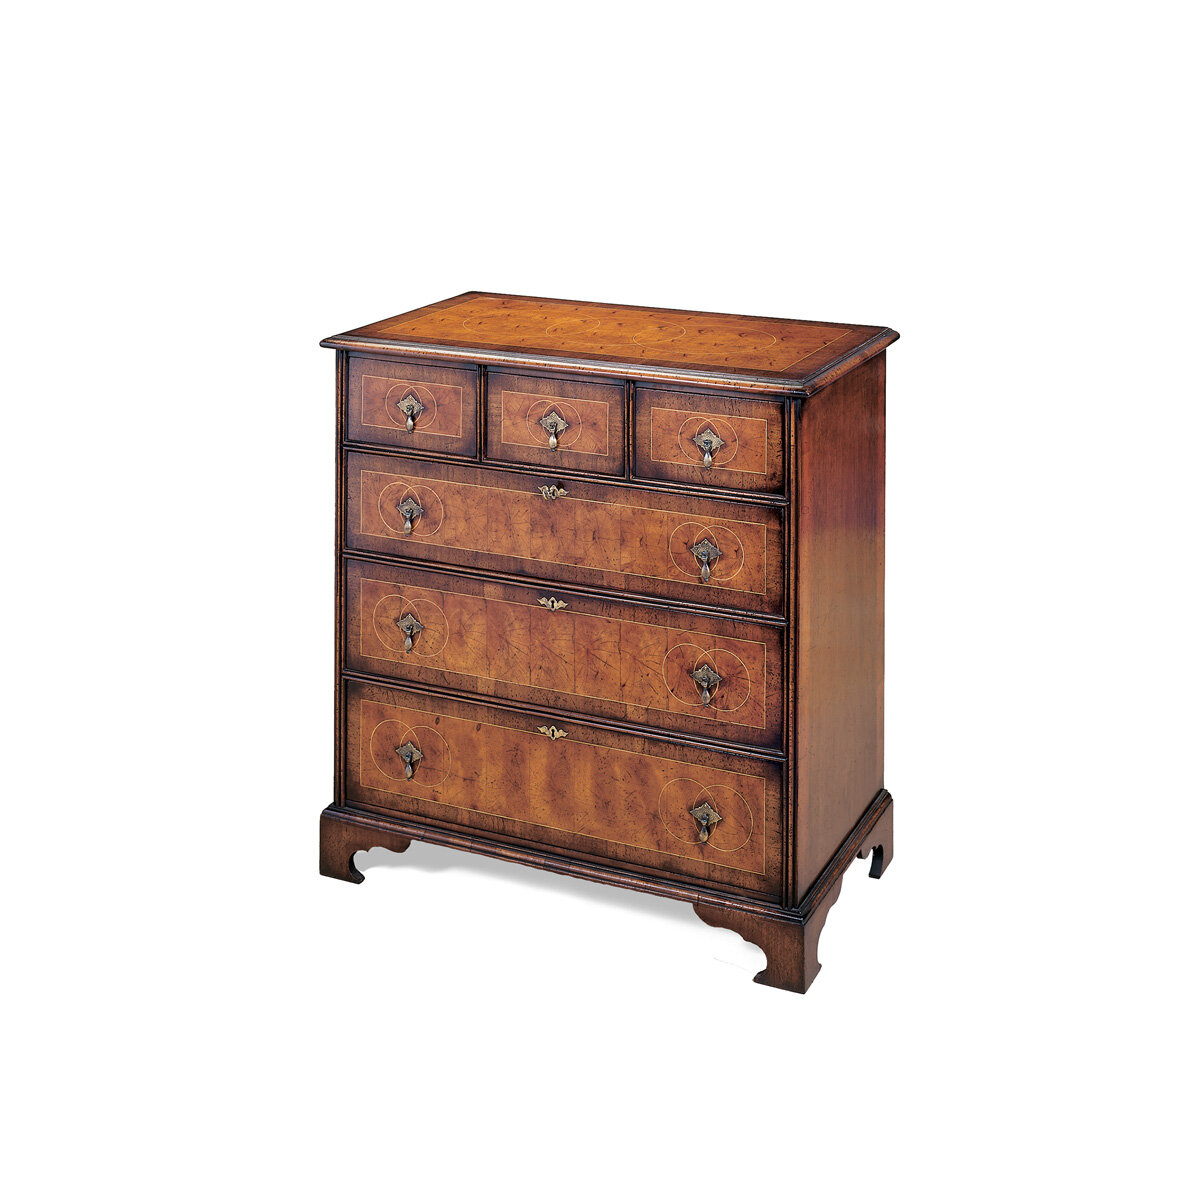 Large Oyster Veneer Chest in Yew Wood